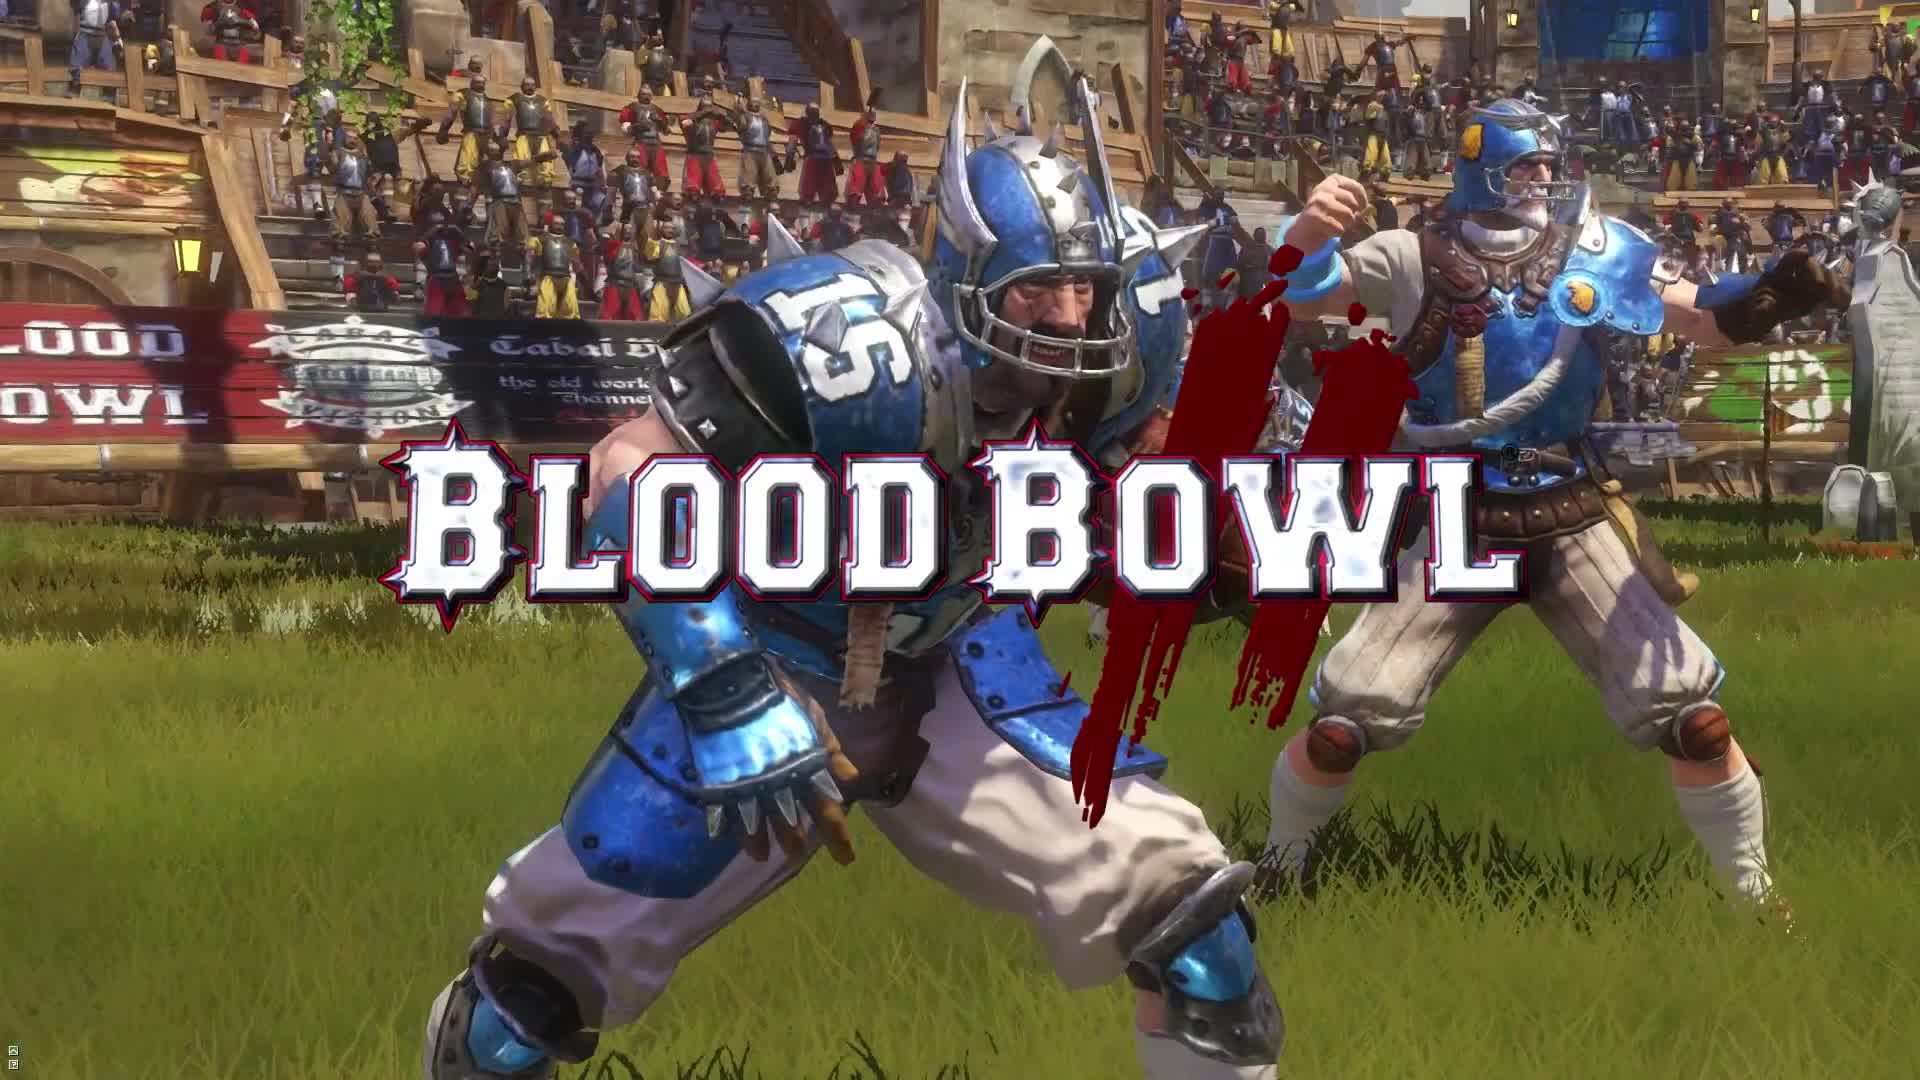 Blood Bowl 2 - Overview trailer